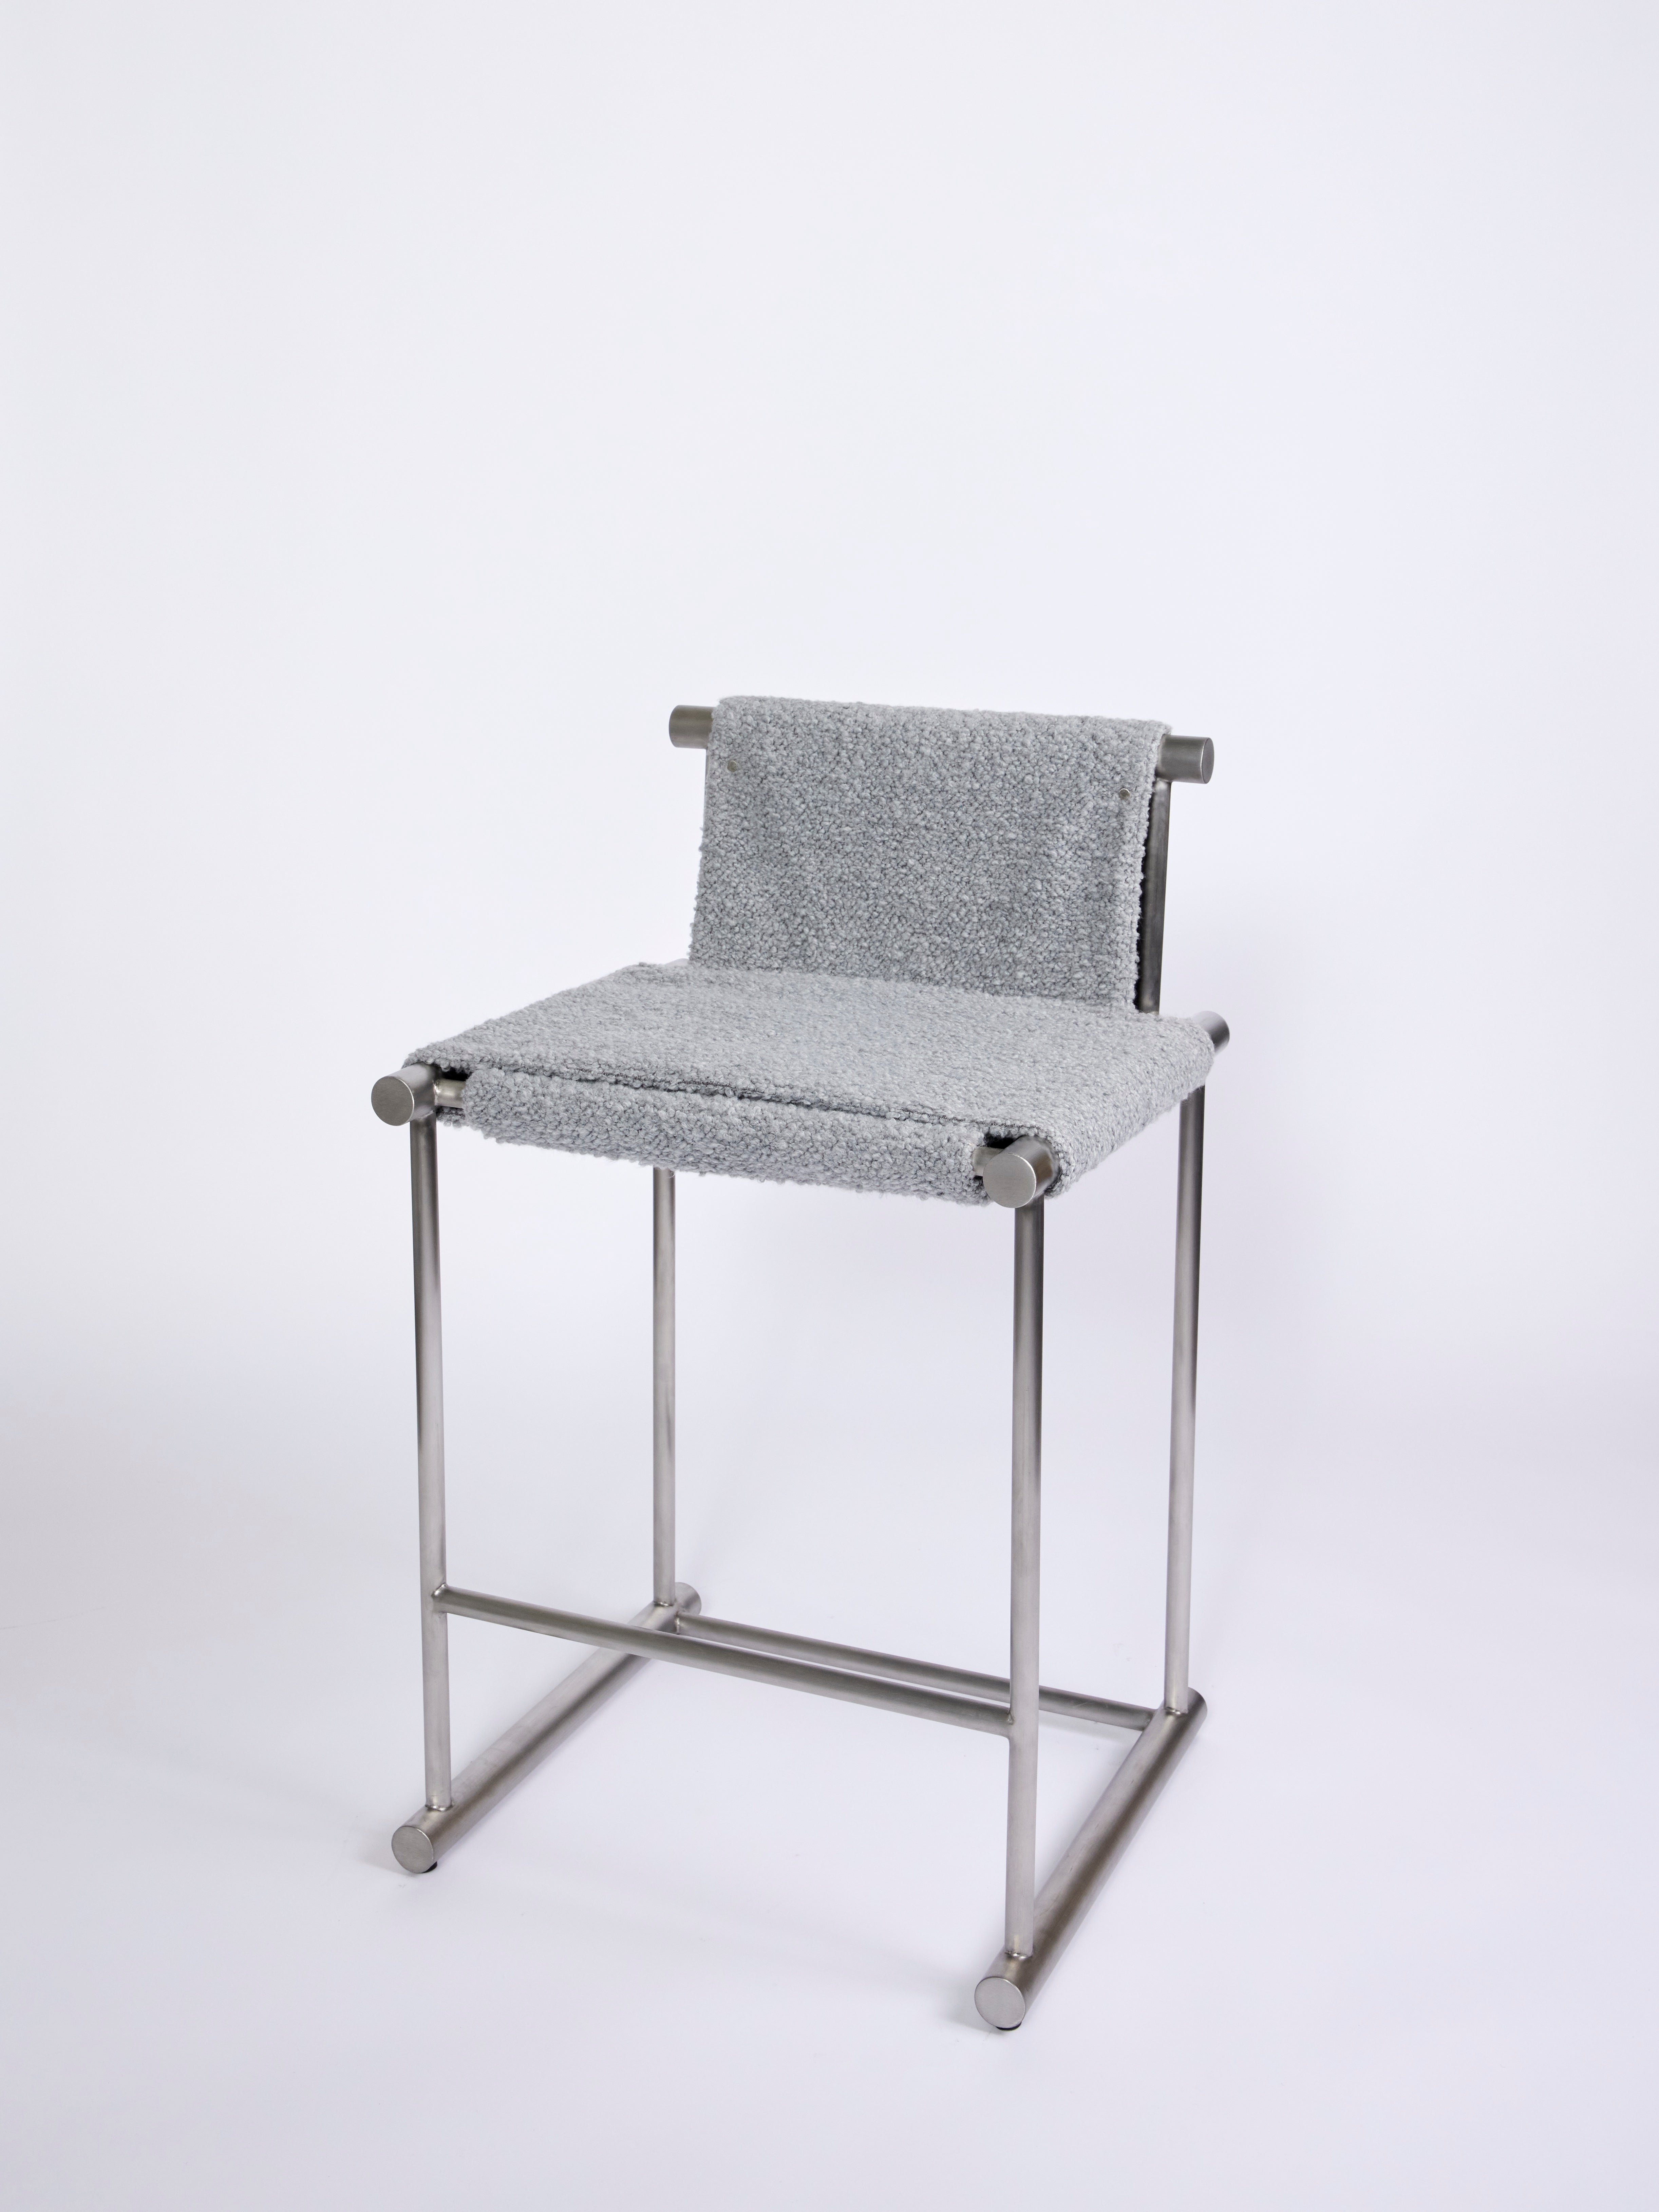 Skeleton Counter Chair

Materials: brush stainless and boucle
Dimensions: 21